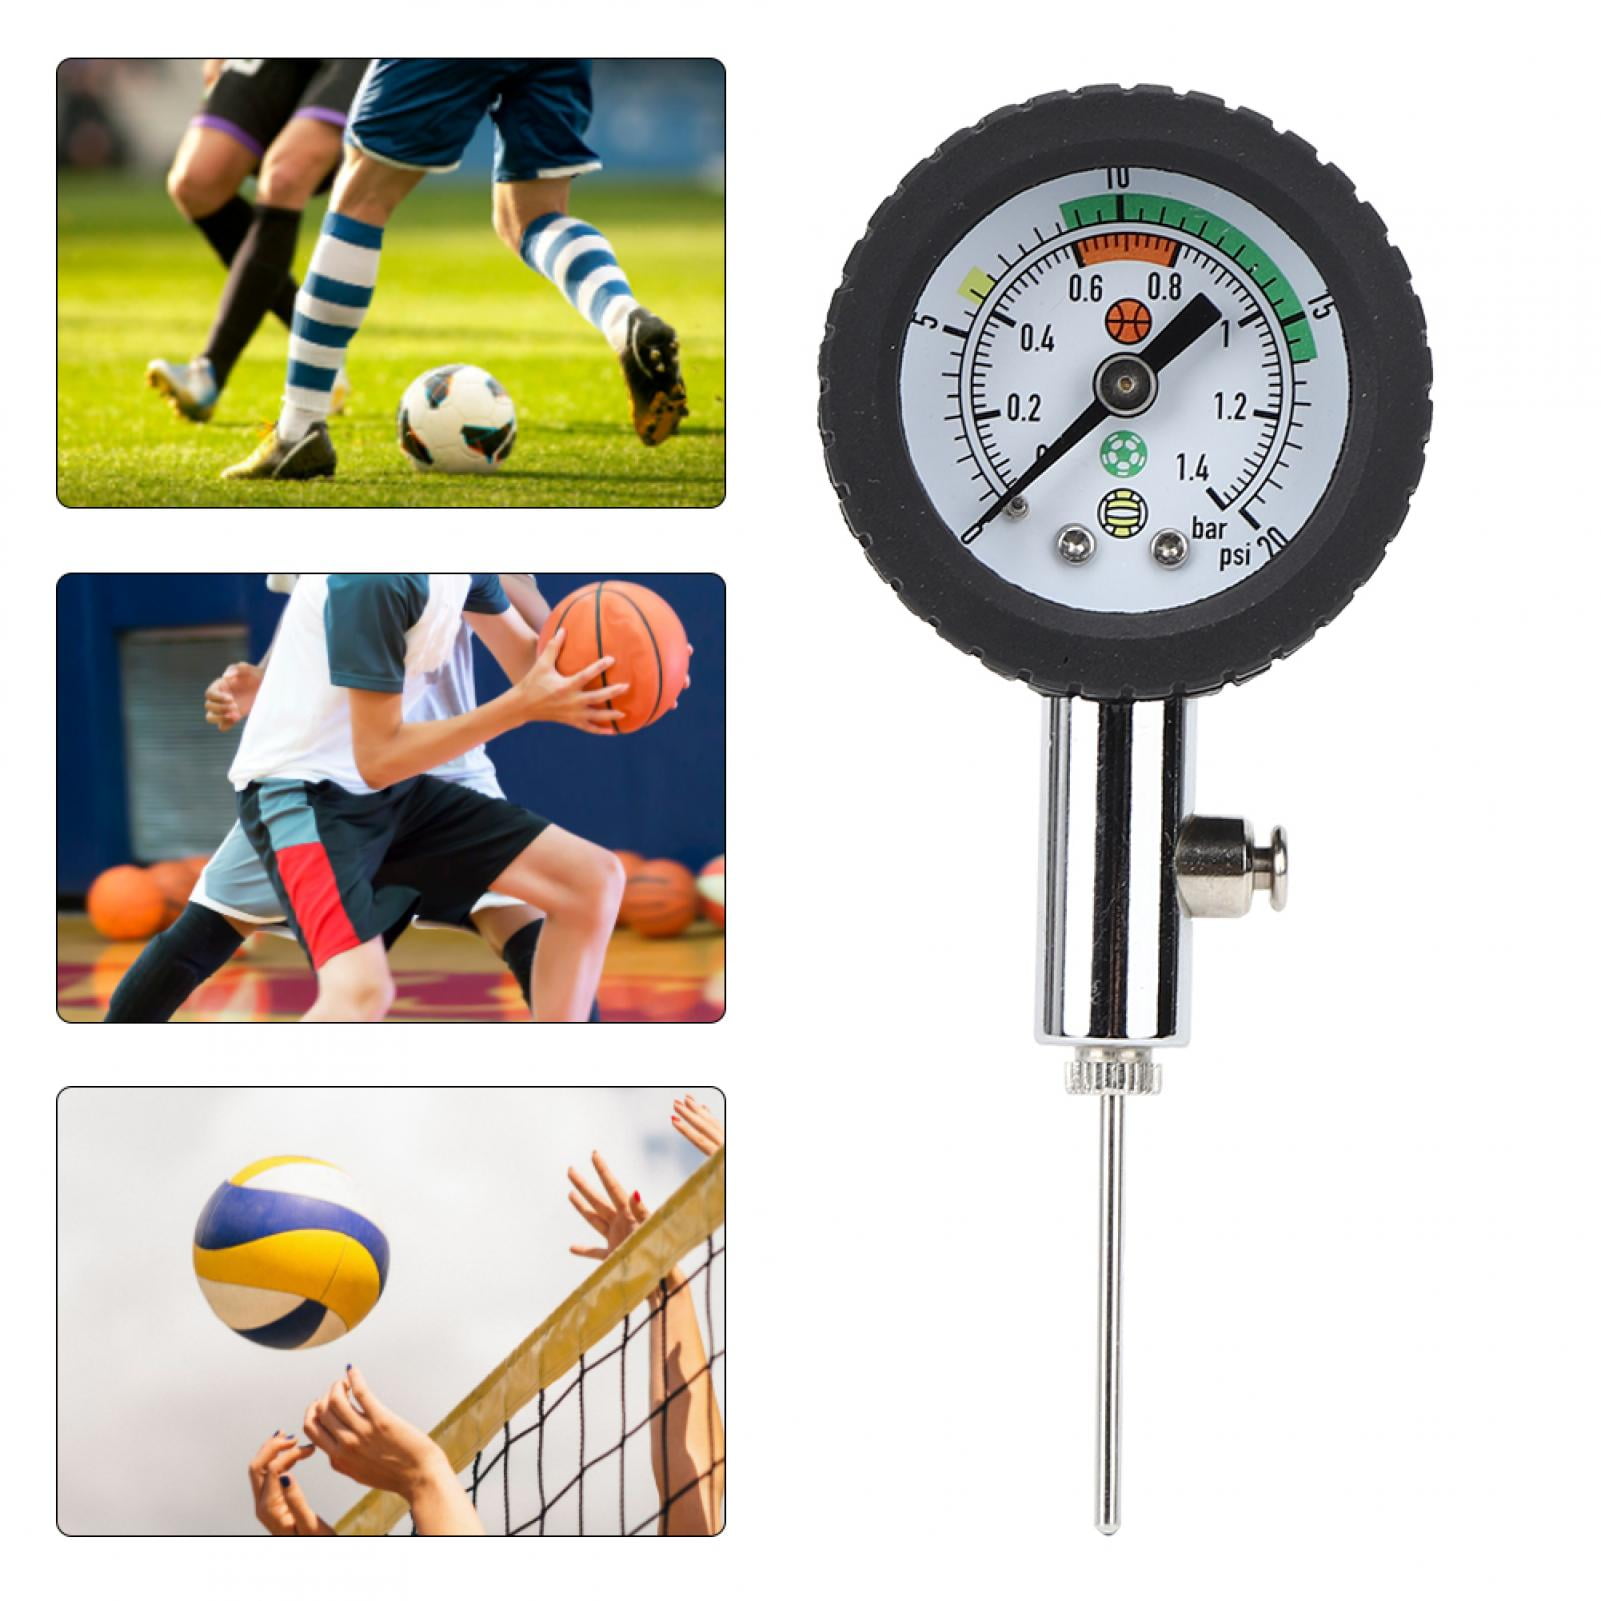 New Champion All Sports Ball 20 PSI Pressure Gauge Volleyball Soccer Football 